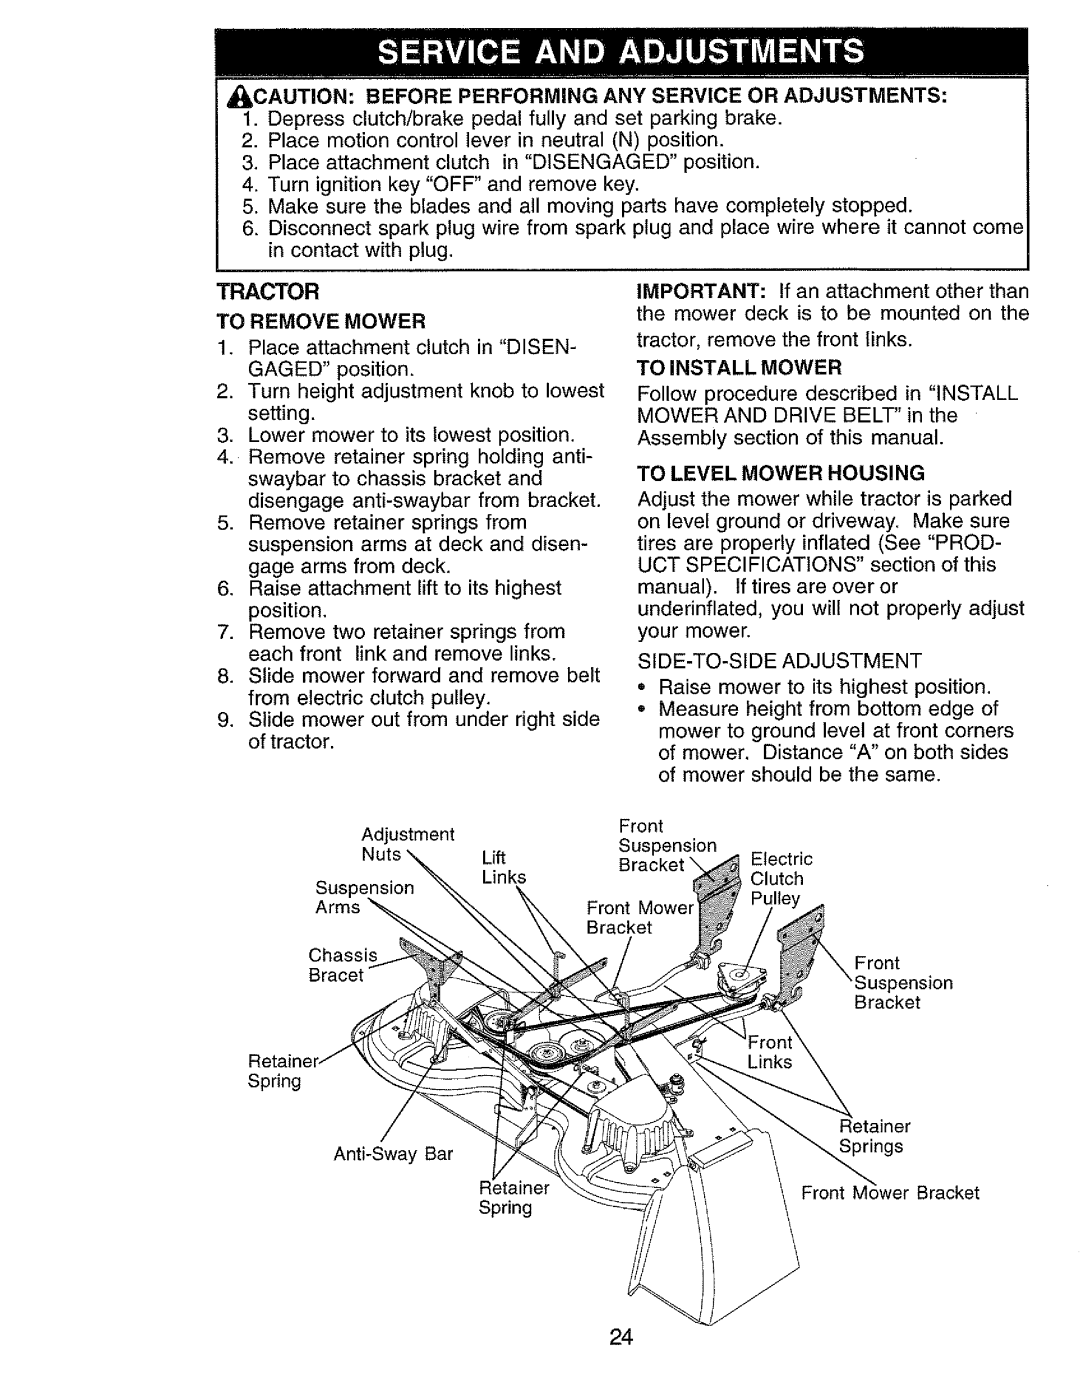 Craftsman 917.273062 owner manual To Remove Mower, To Install Mower, To Level Mower Housing, SIDE-TO-SIDE Adjustment 